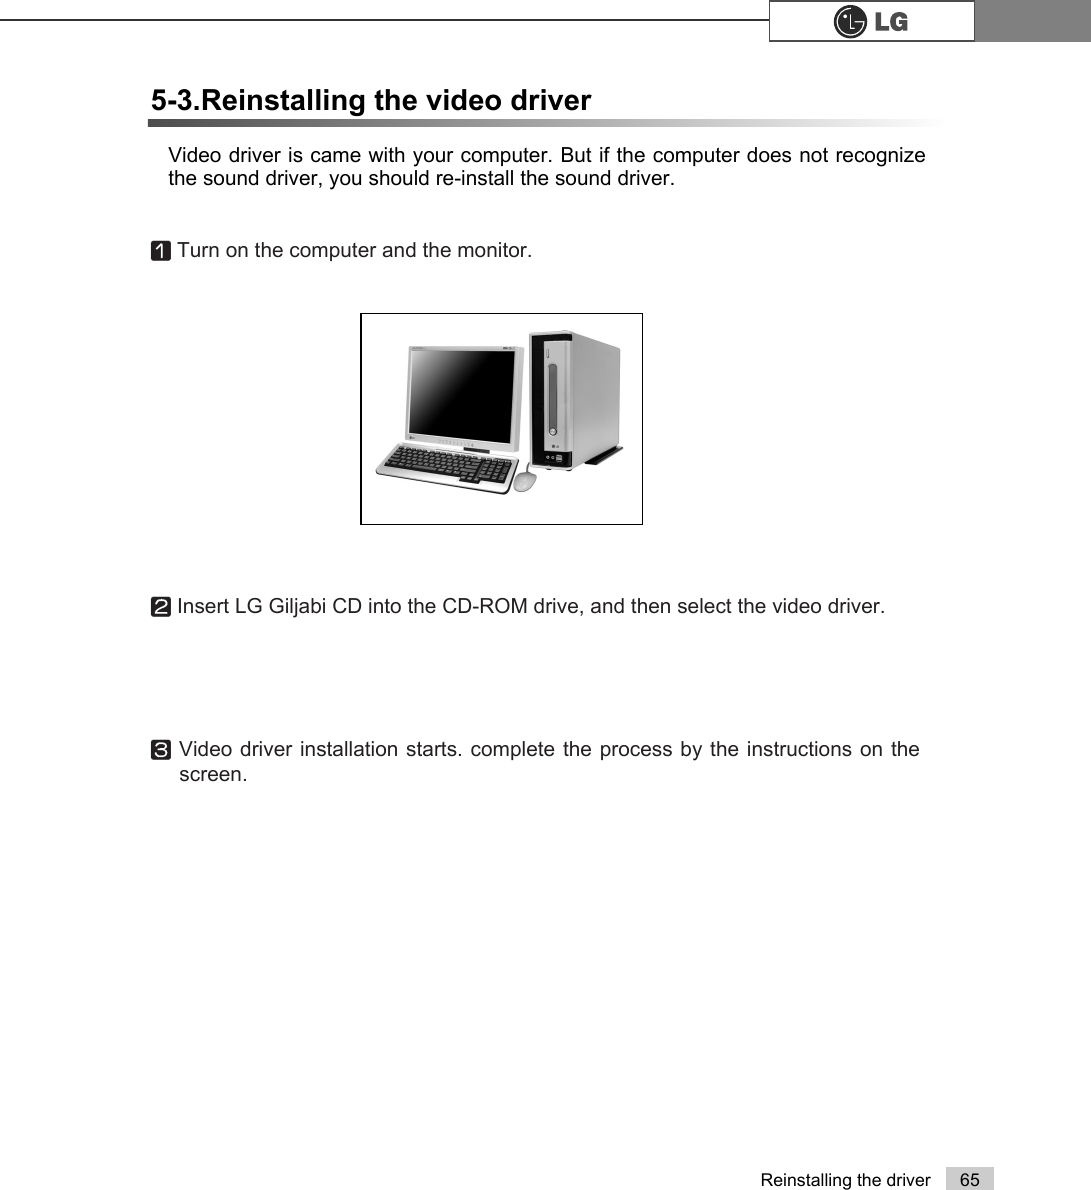 65Reinstalling the driverVideo driver is came with your computer. But if the computer does not recognizethe sound driver, you should re-install the sound driver.5-3.Reinstalling the video driverⓞTurn on the computer and the monitor.ⓟInsert LG Giljabi CD into the CD-ROM drive, and then select the video driver.ⓠVideo driver installation starts. complete the process by the instructions on thescreen.